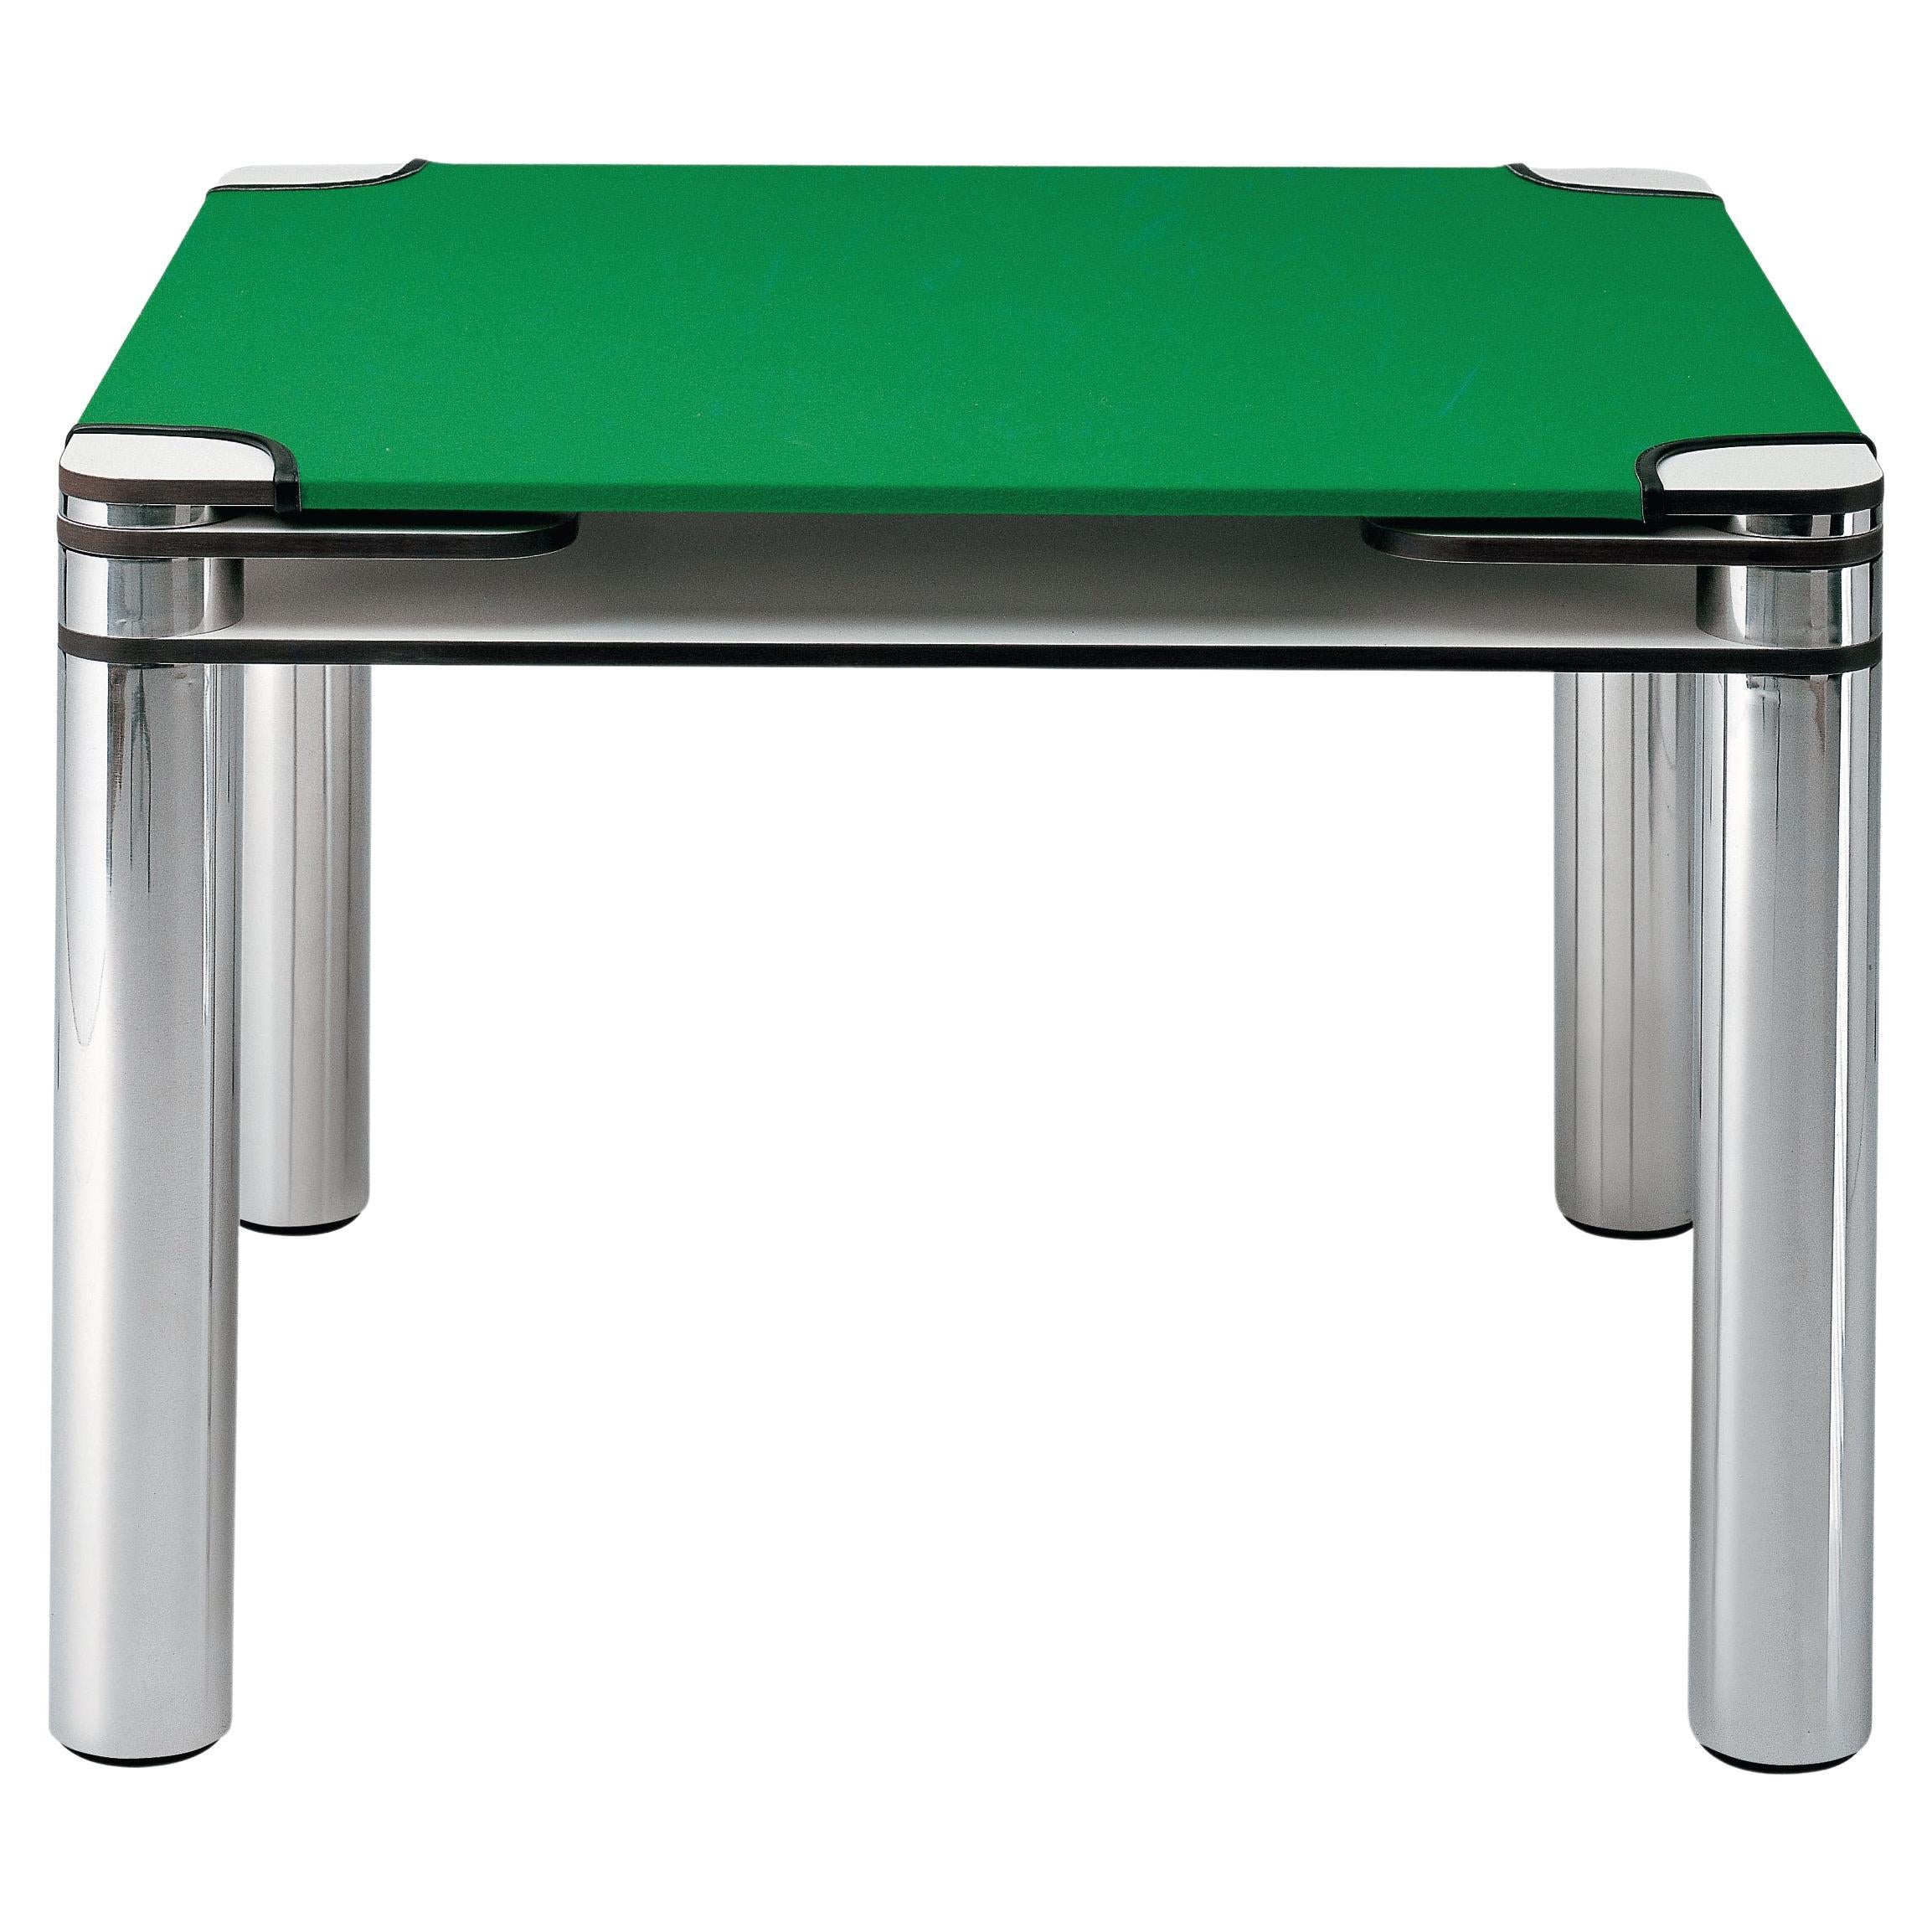 Zanotta Poker Card Table in Double Top White Plastic Laminate and Green Leather For Sale